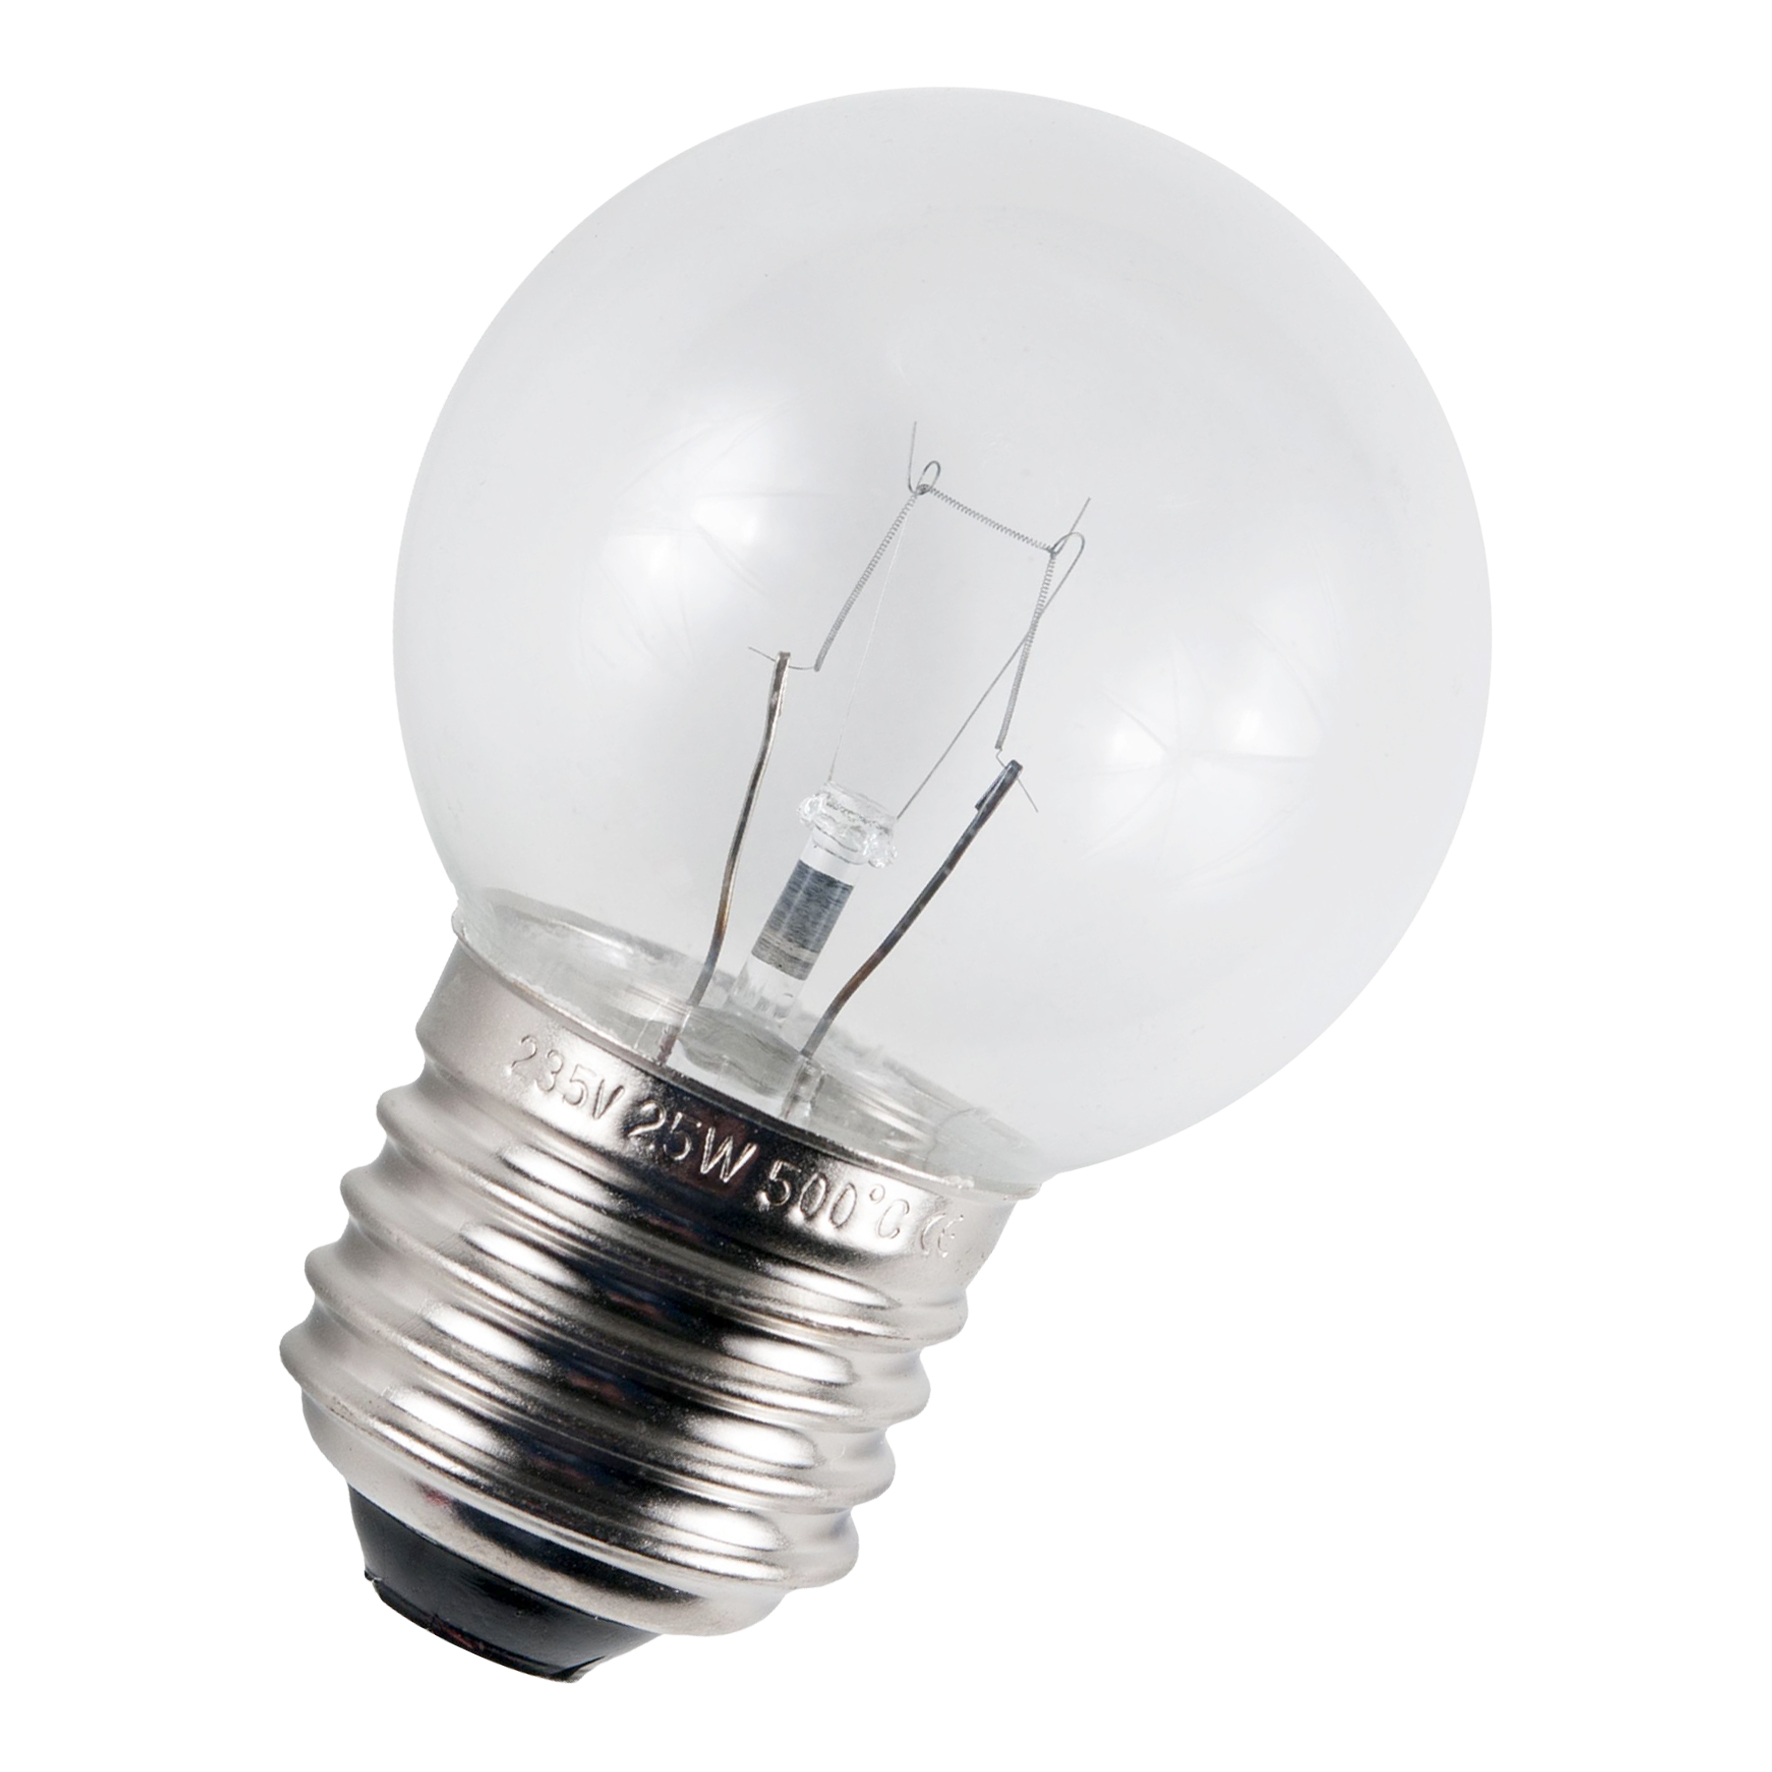 05994100030751 - Lamps - | lamp - e-Bailey Bailey incandescent Sphere-shaped